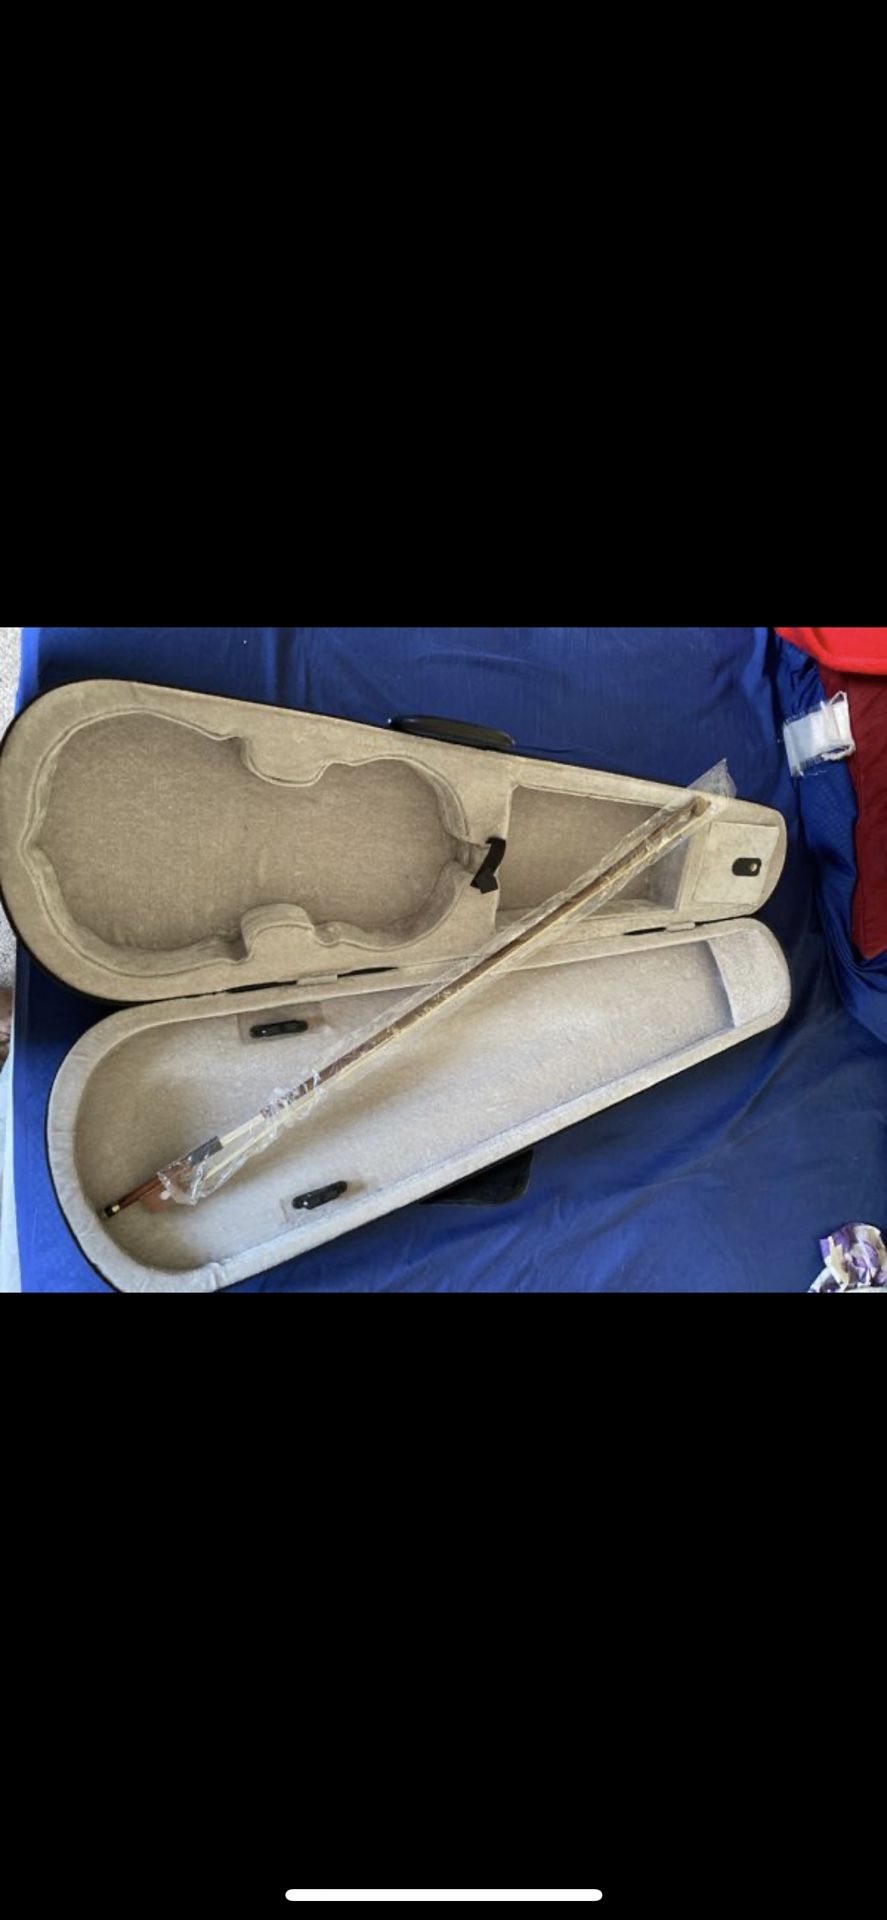 NEW never used 3/4 Violin Case and NEW bow